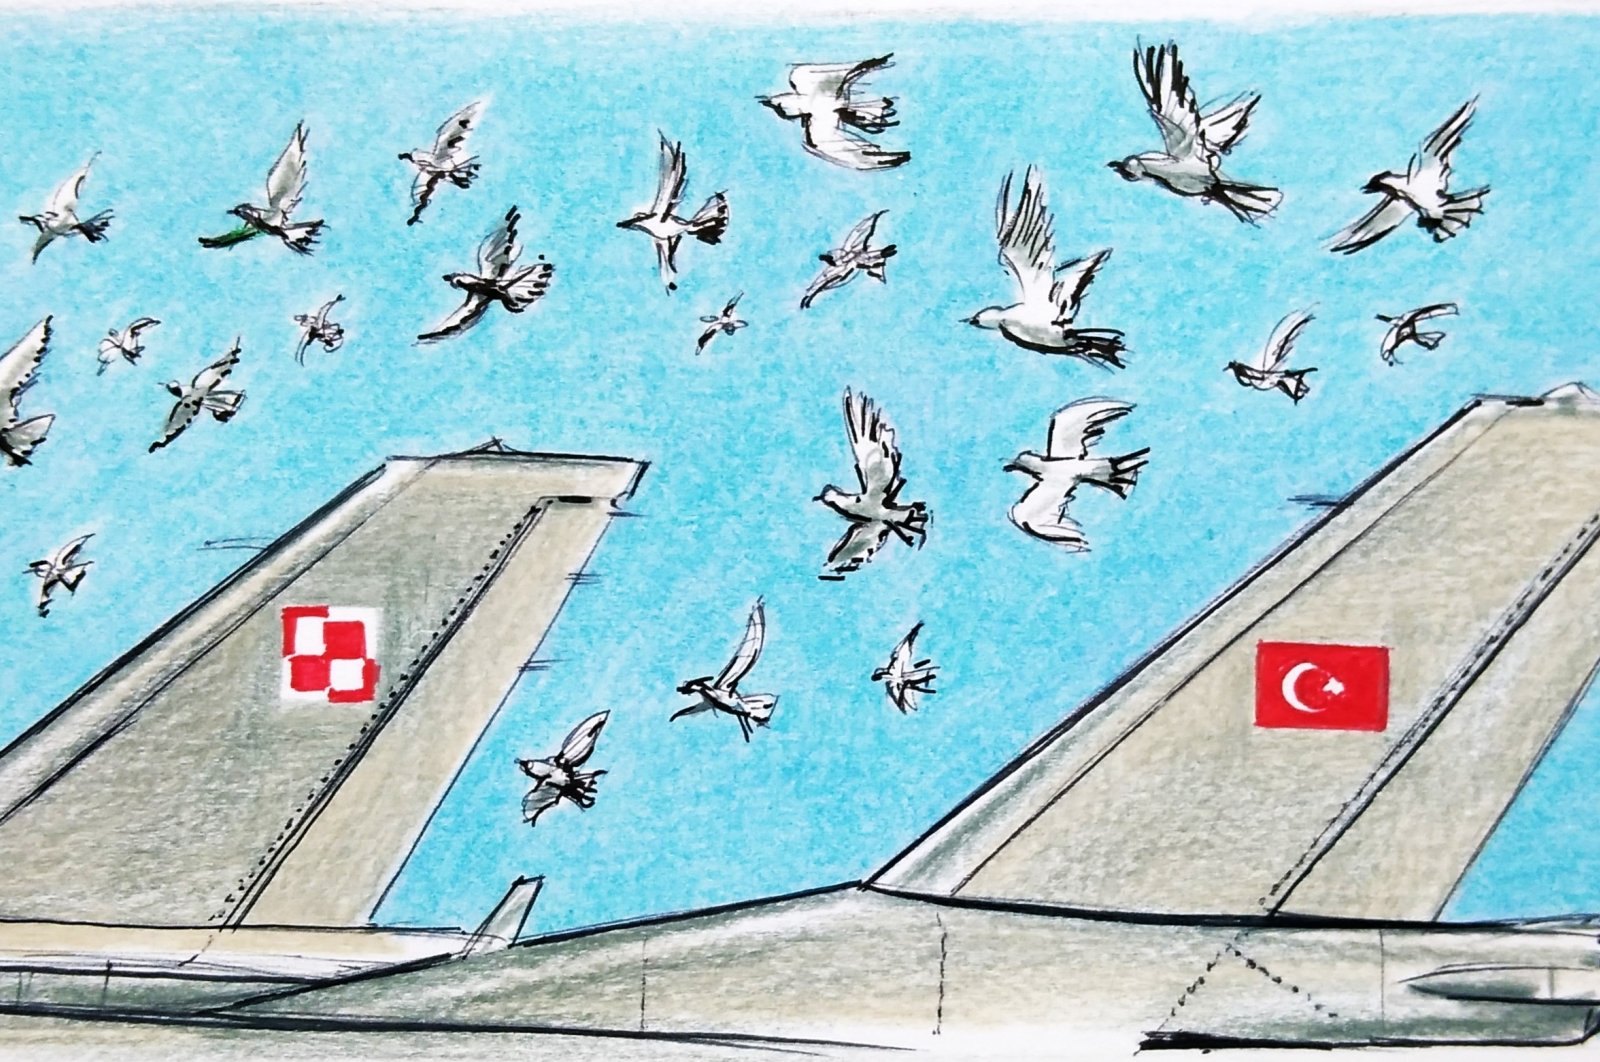 "Poland has purchased the famous Turkish drones, which have made their name known to the whole world for their successful missions in Syria, Libya and Karabakh and have attracted a lot of attention from different geographies of the world, including the European Union and NATO countries." (Illustration by Erhan Yalvaç)